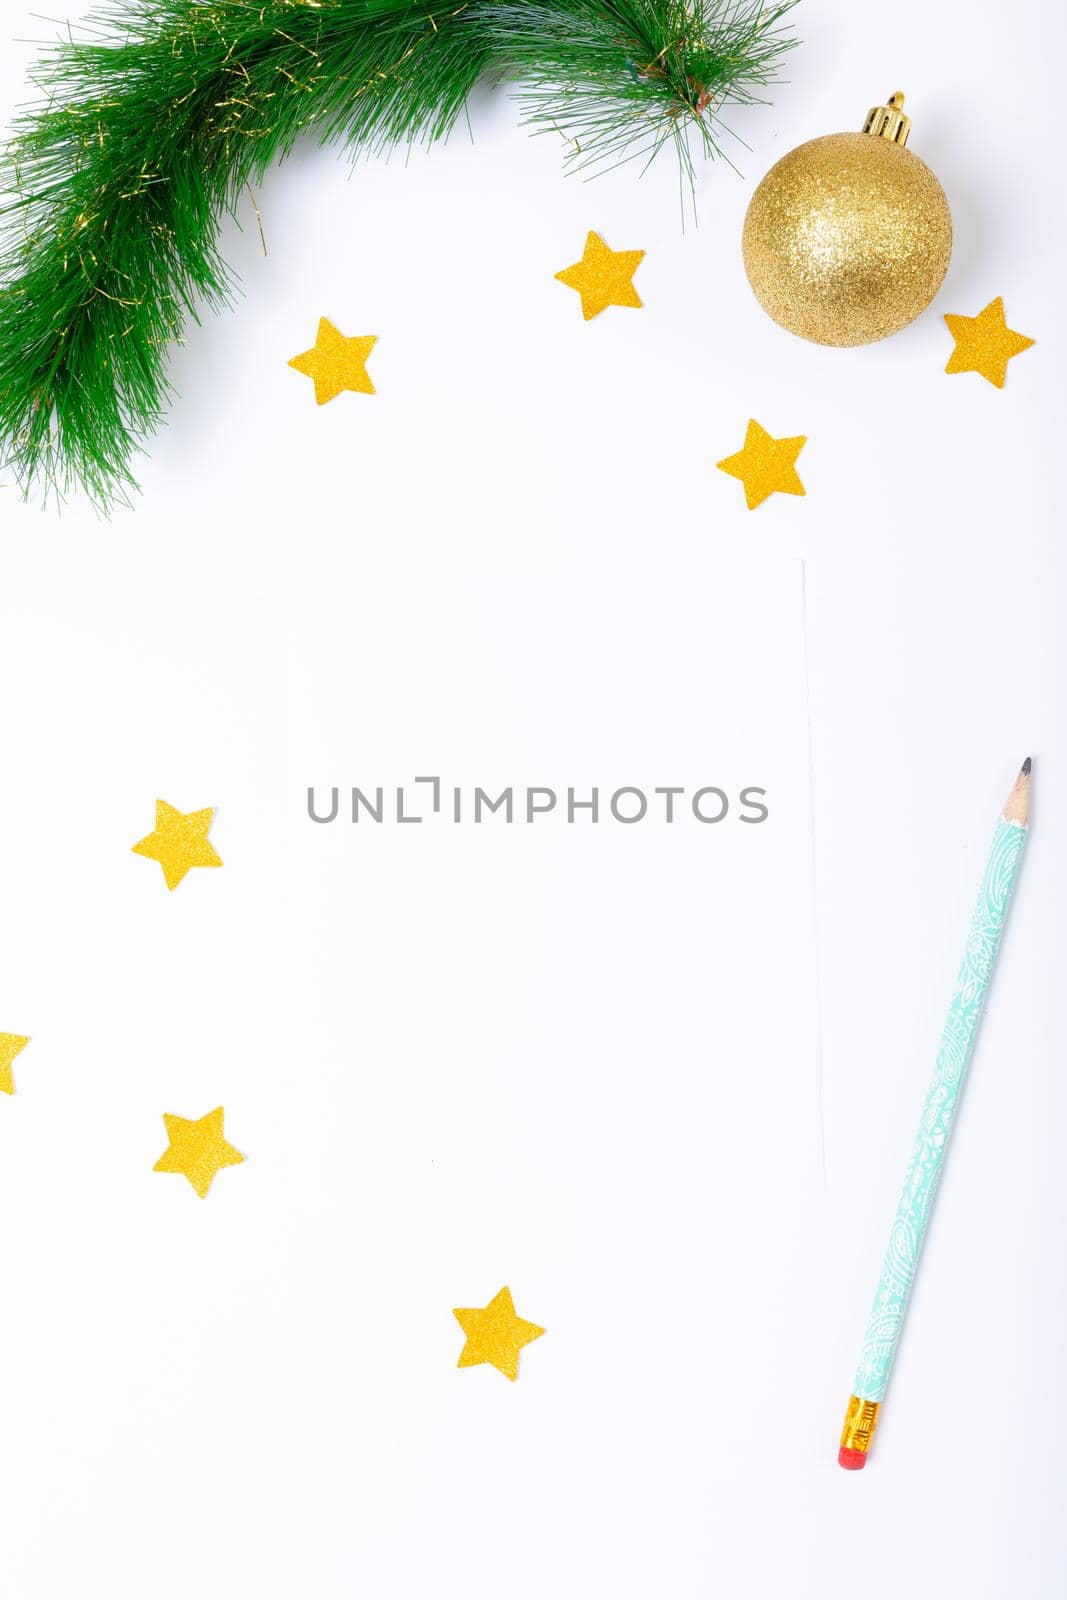 Composition of christmas decorations with bauble, stars, pencil and copy space on white background by Wavebreakmedia